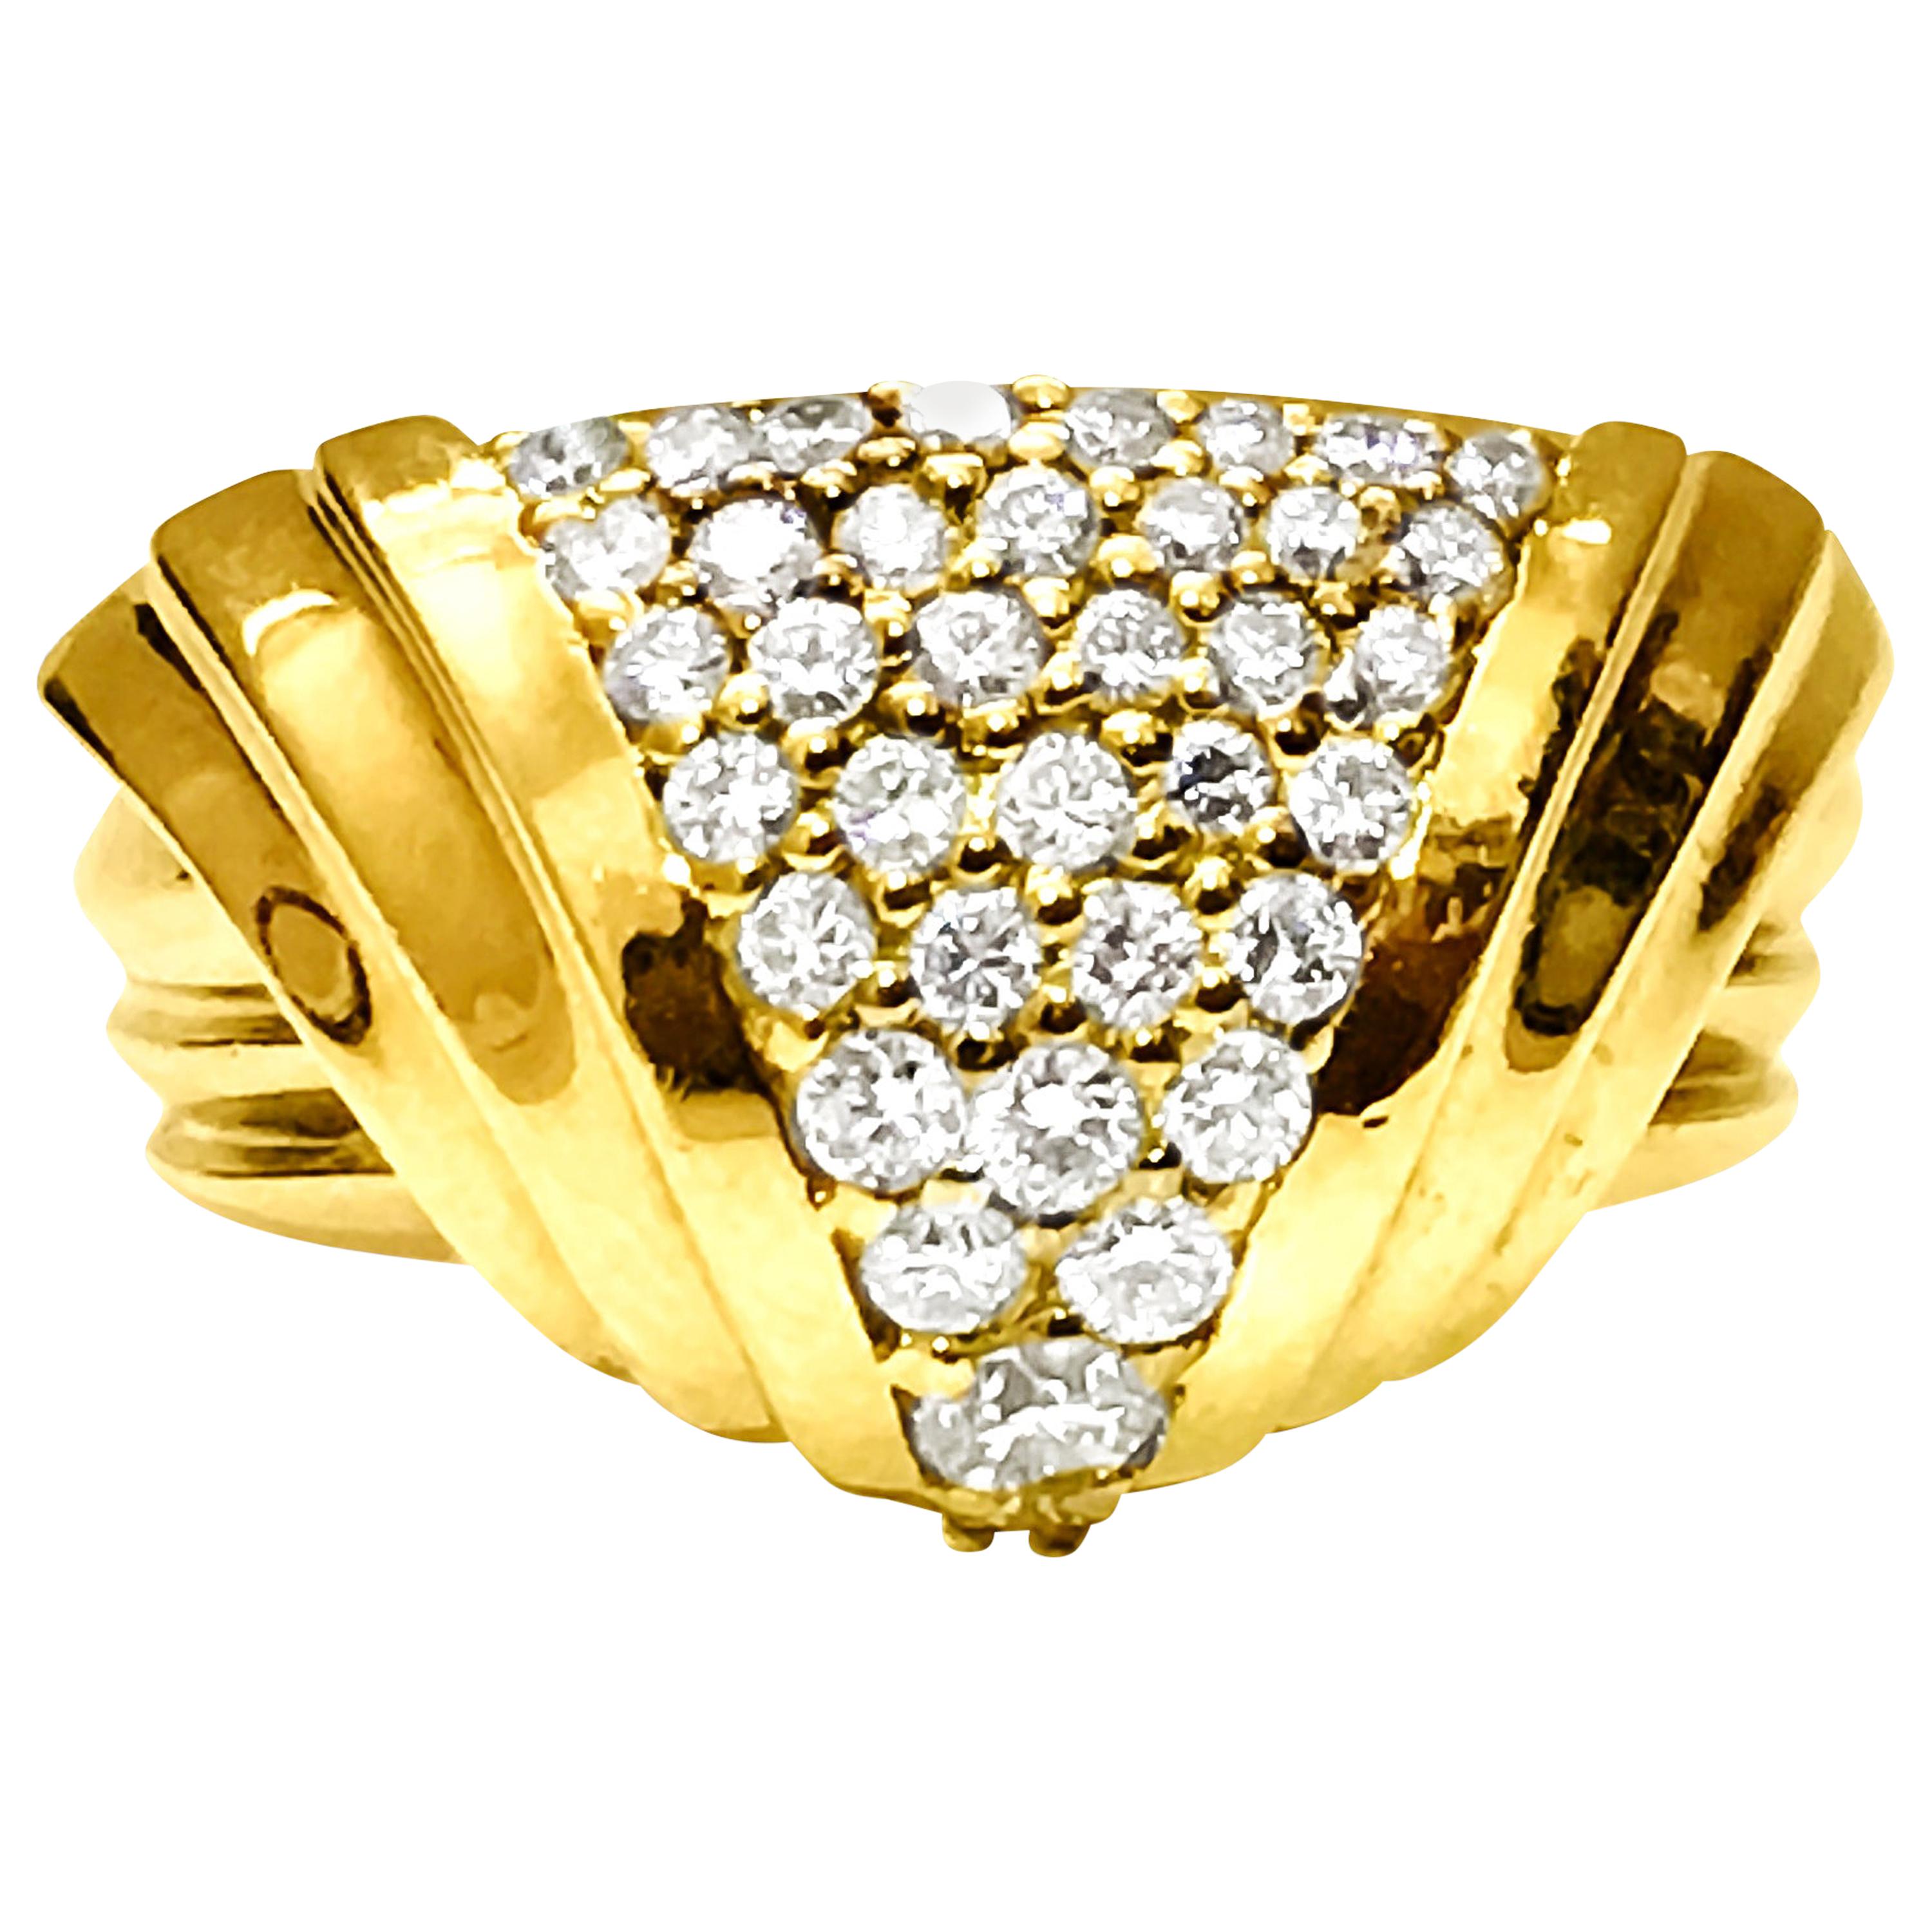 Art Deco Style 1.10 Carat Diamond and Yellow Gold Ring For Sale